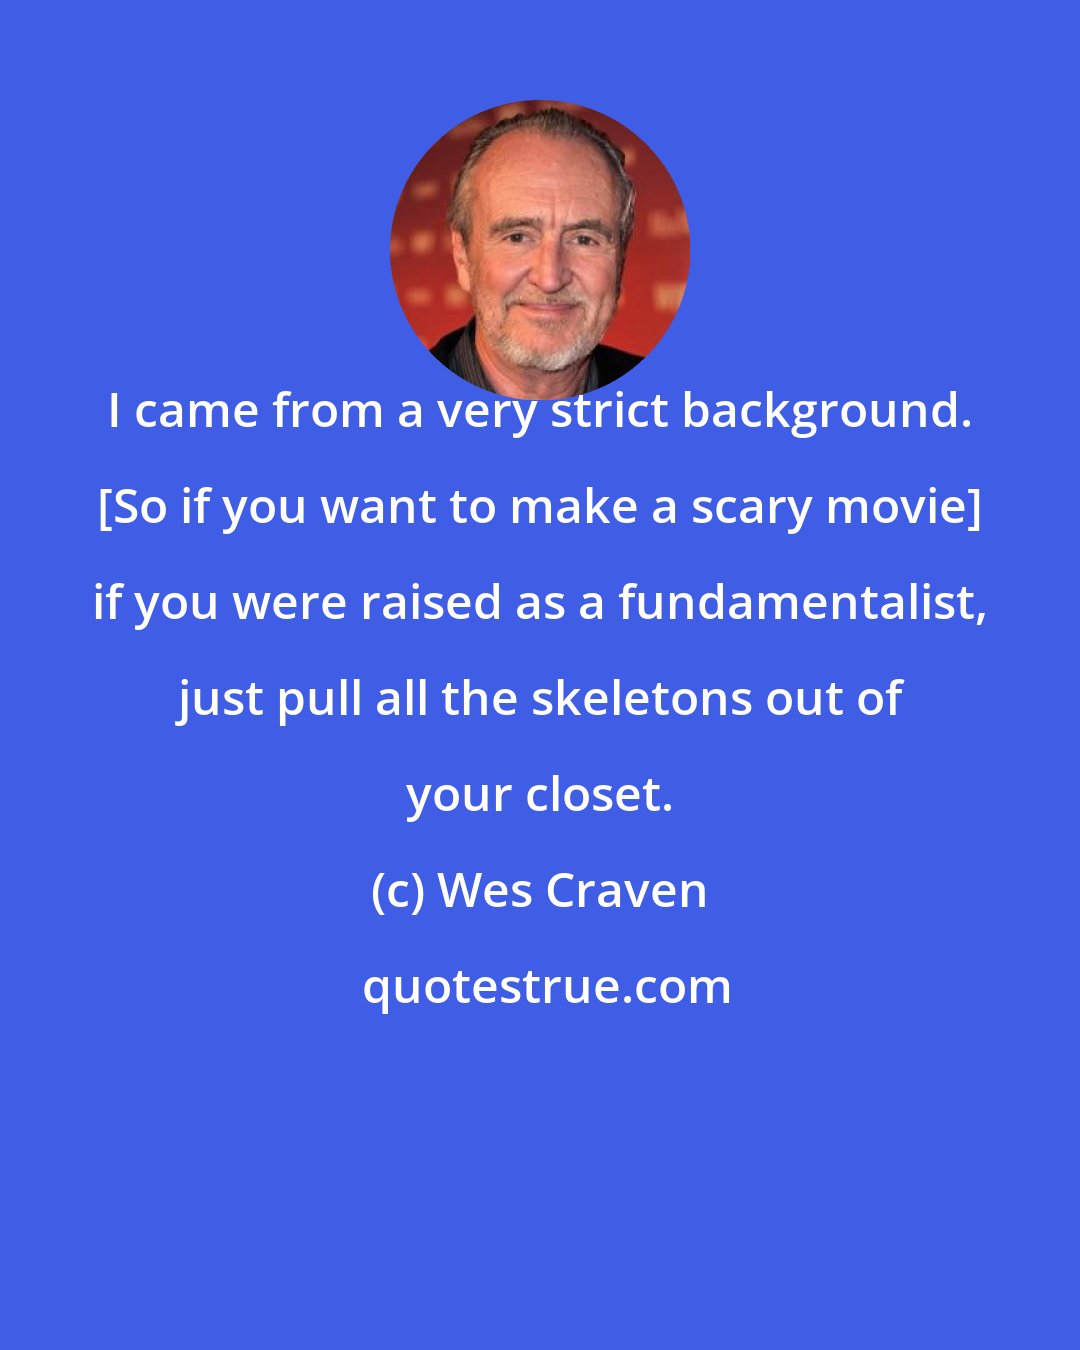 Wes Craven: I came from a very strict background. [So if you want to make a scary movie] if you were raised as a fundamentalist, just pull all the skeletons out of your closet.